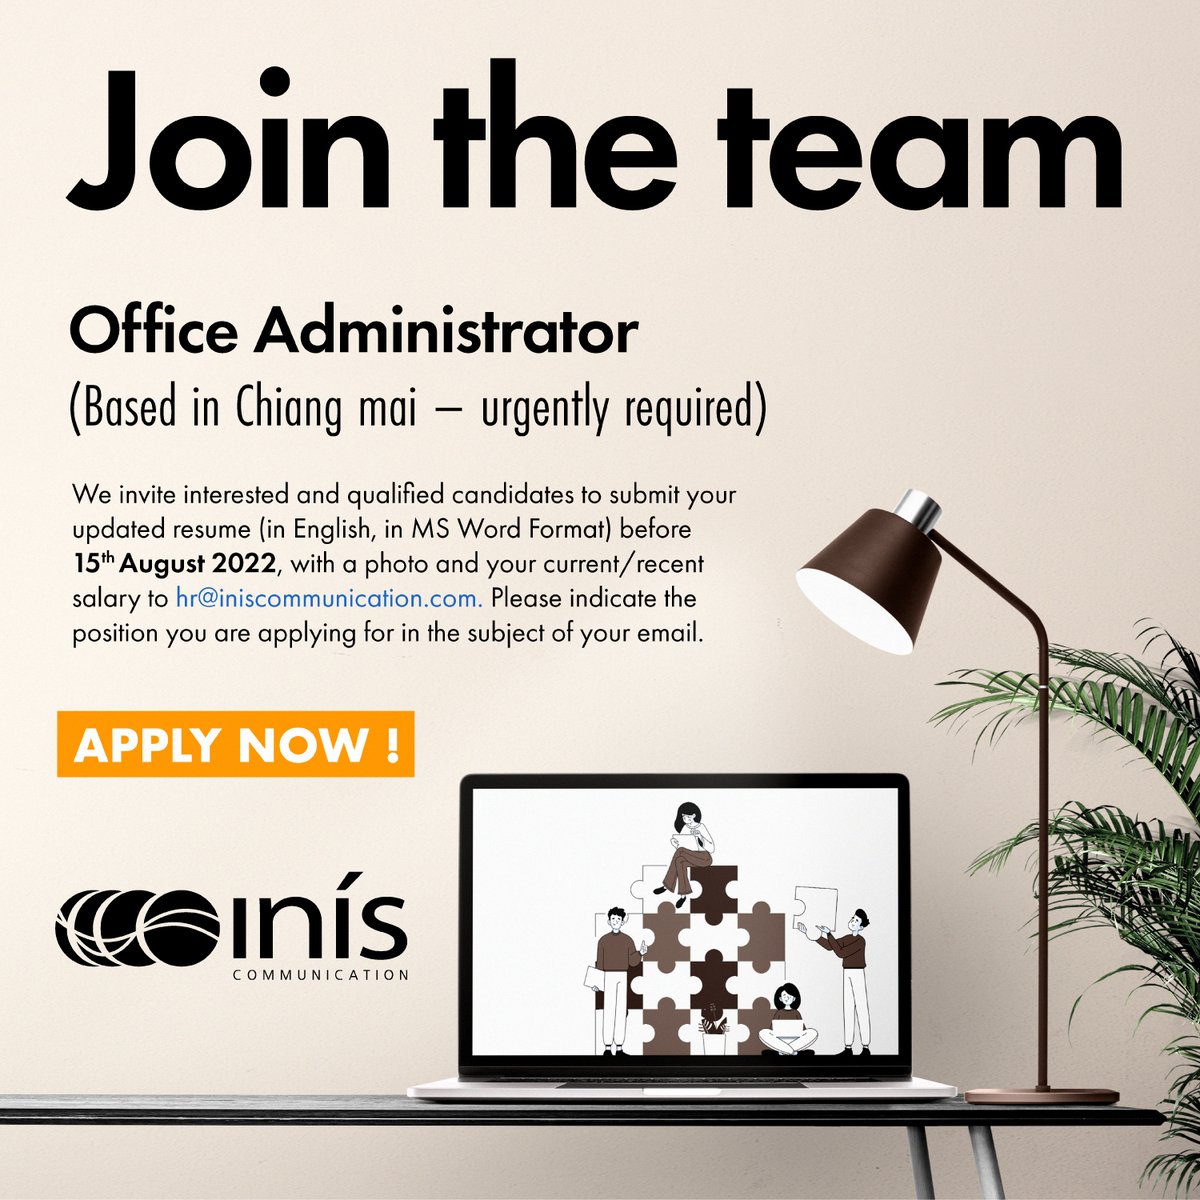 test Twitter Media - Inis Communication is looking for an Office Administrator to support our team at its head office in #ChiangMai.  Could this be your new opportunity and challenge? More details here: https://t.co/RP8vewwNJk https://t.co/XUOe14Iynb